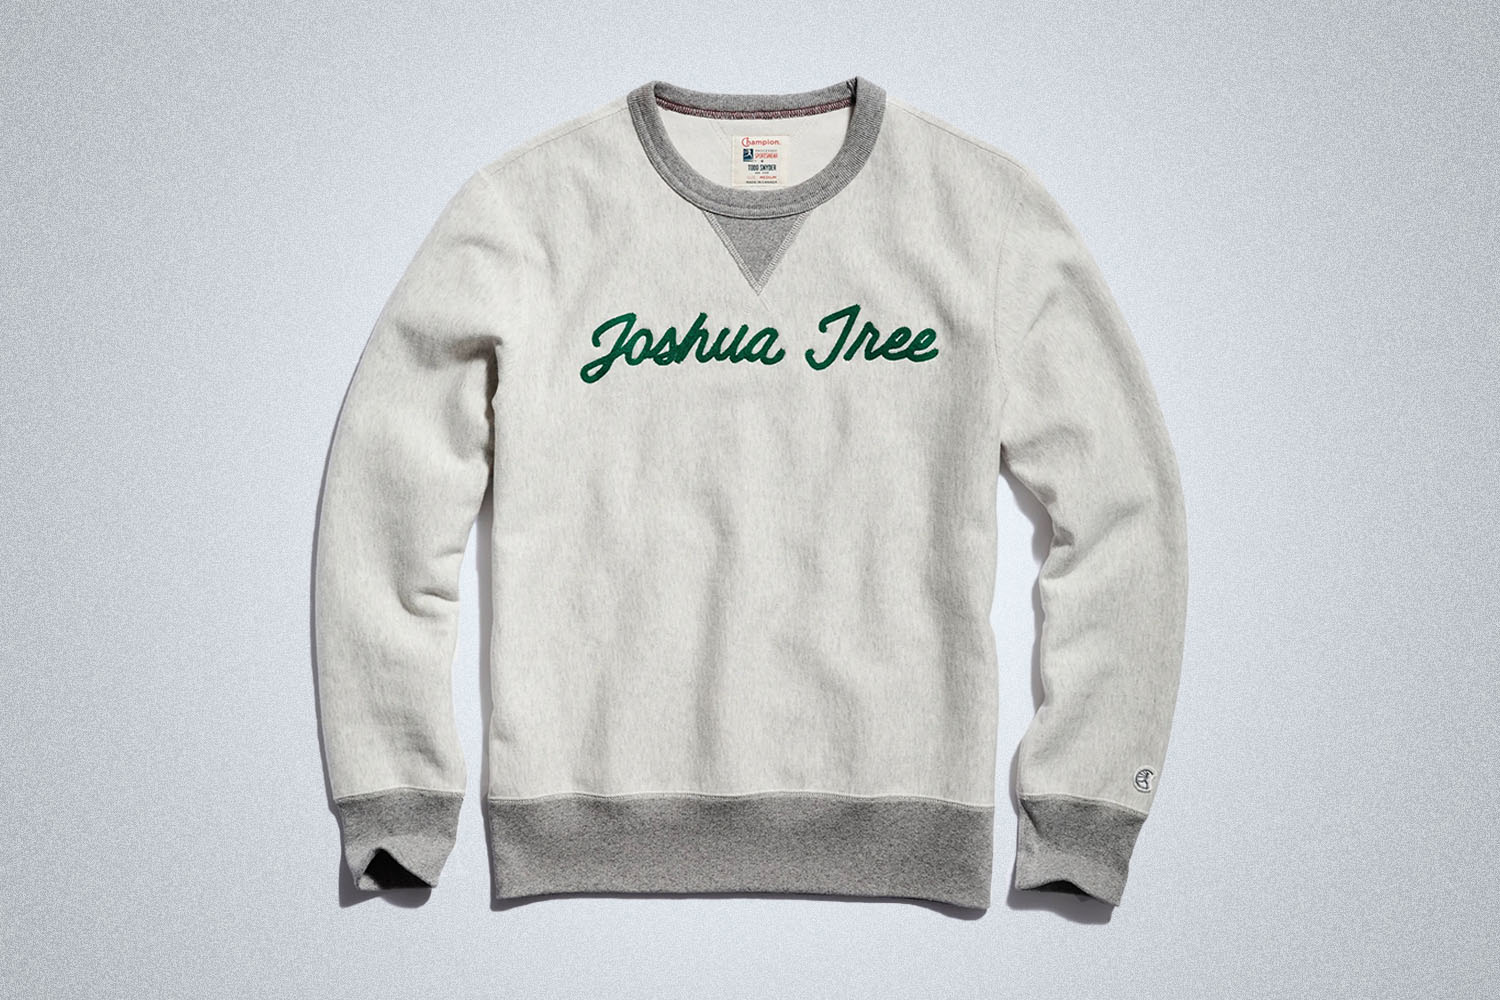 a grey "Joshua tree" sweater from Todd Snyder on a grey background